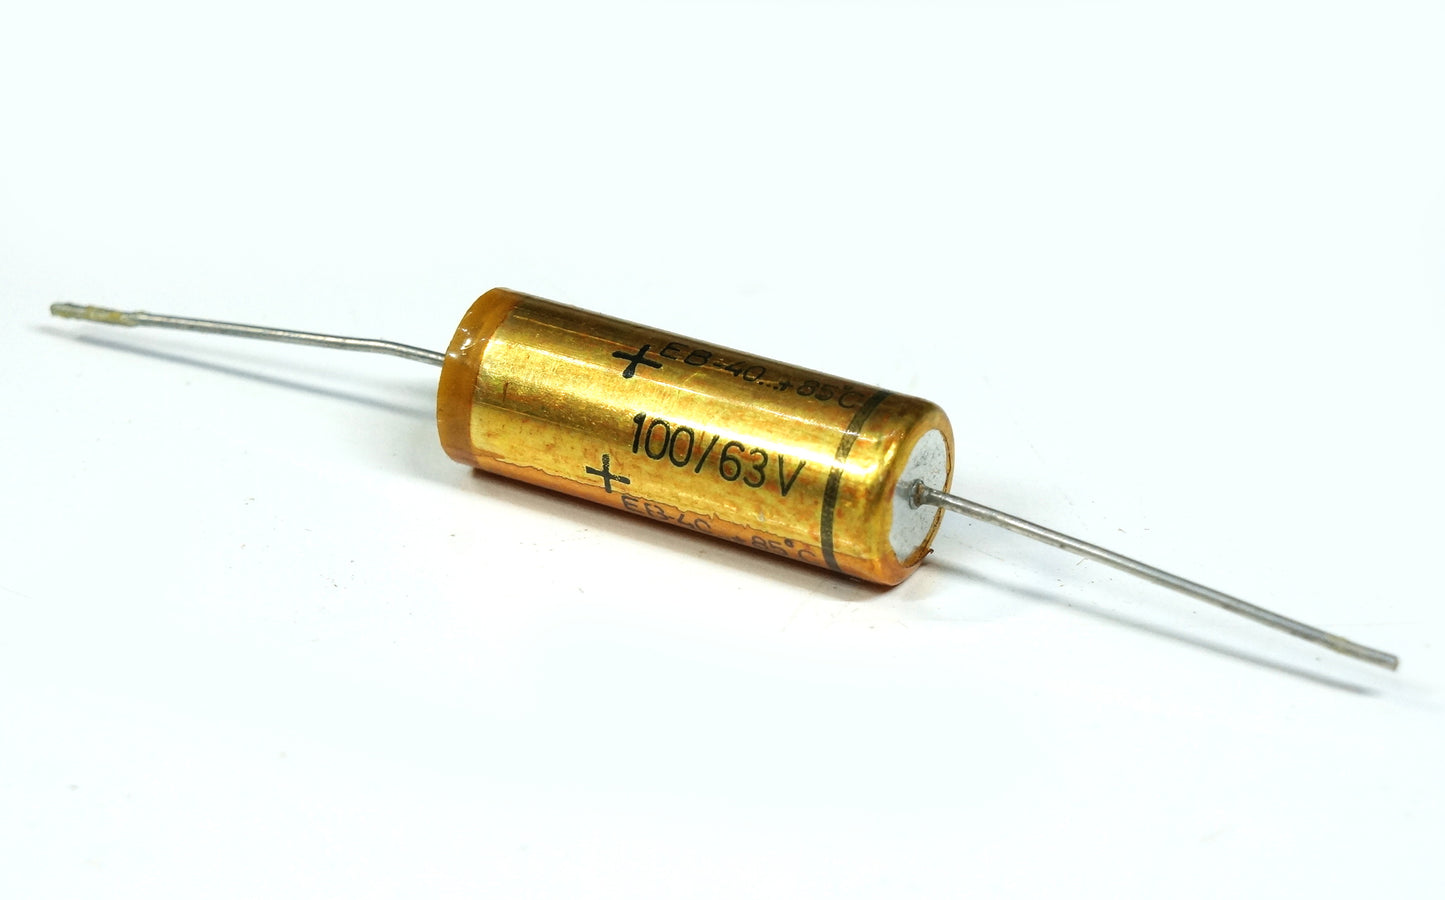 Roderstein ROE 100uF 63V Audio Capacitor Axial Leads